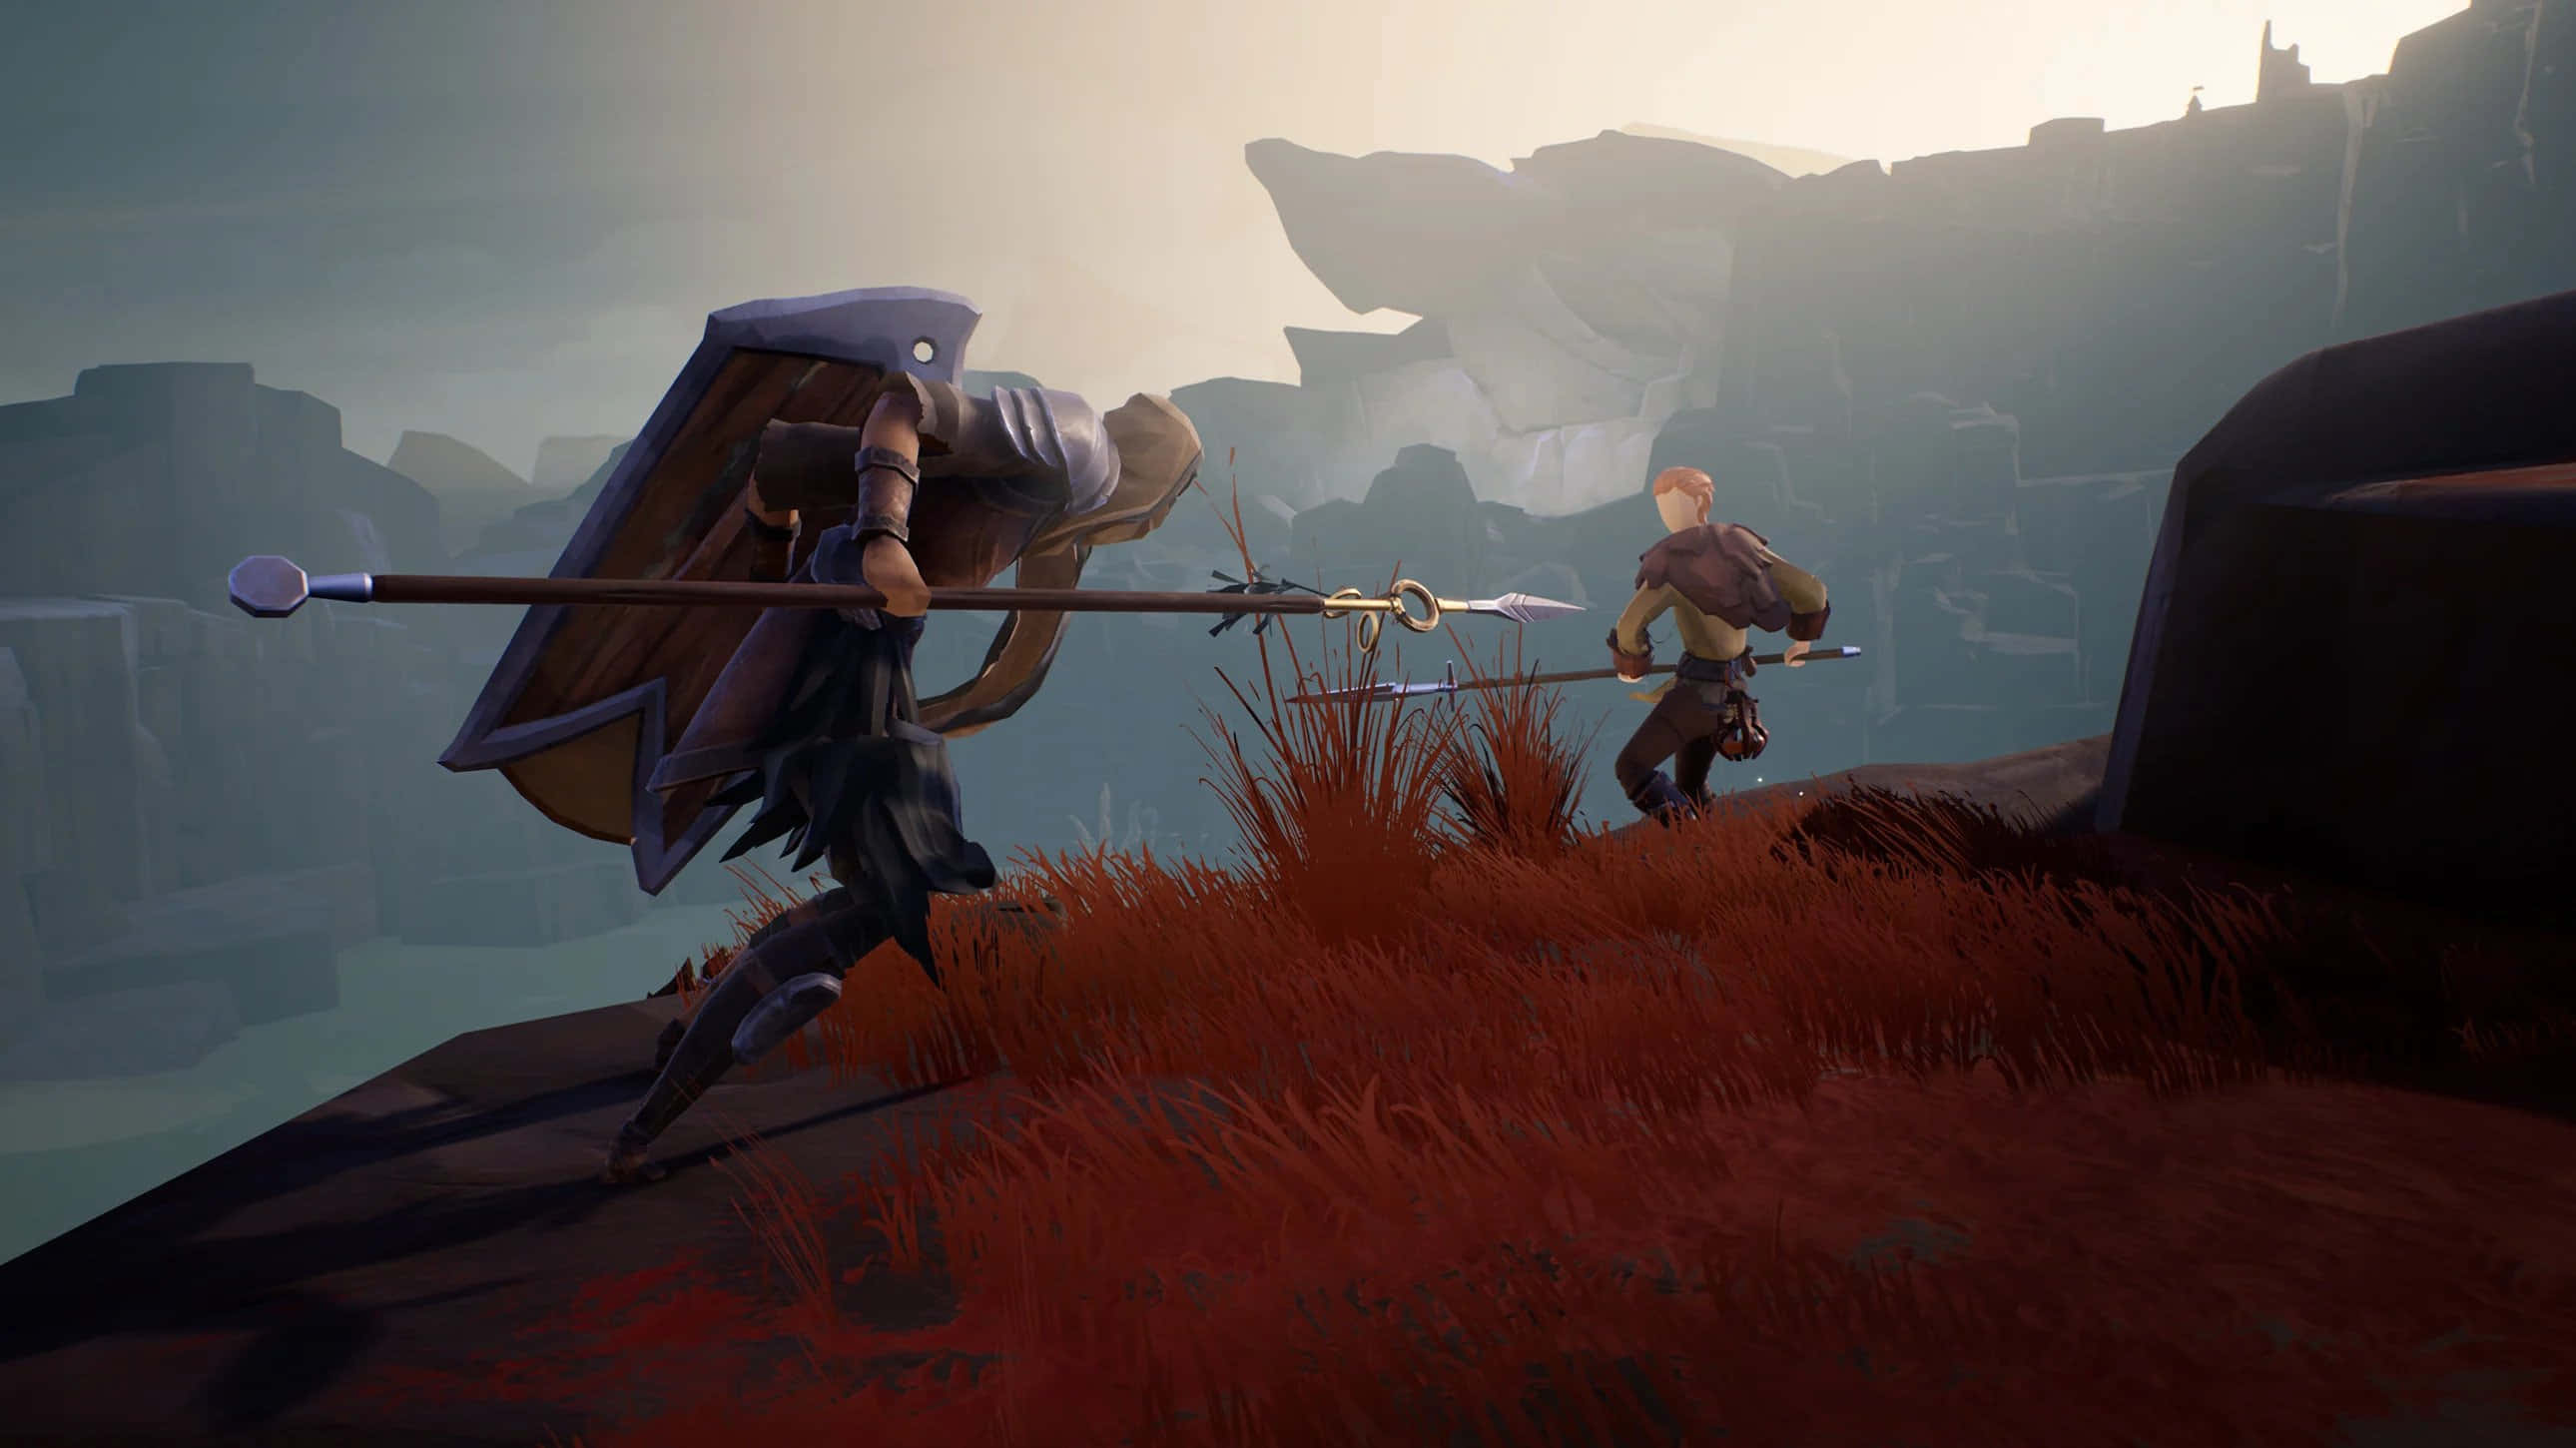 Discover the secrets of the night in Ashen Wallpaper